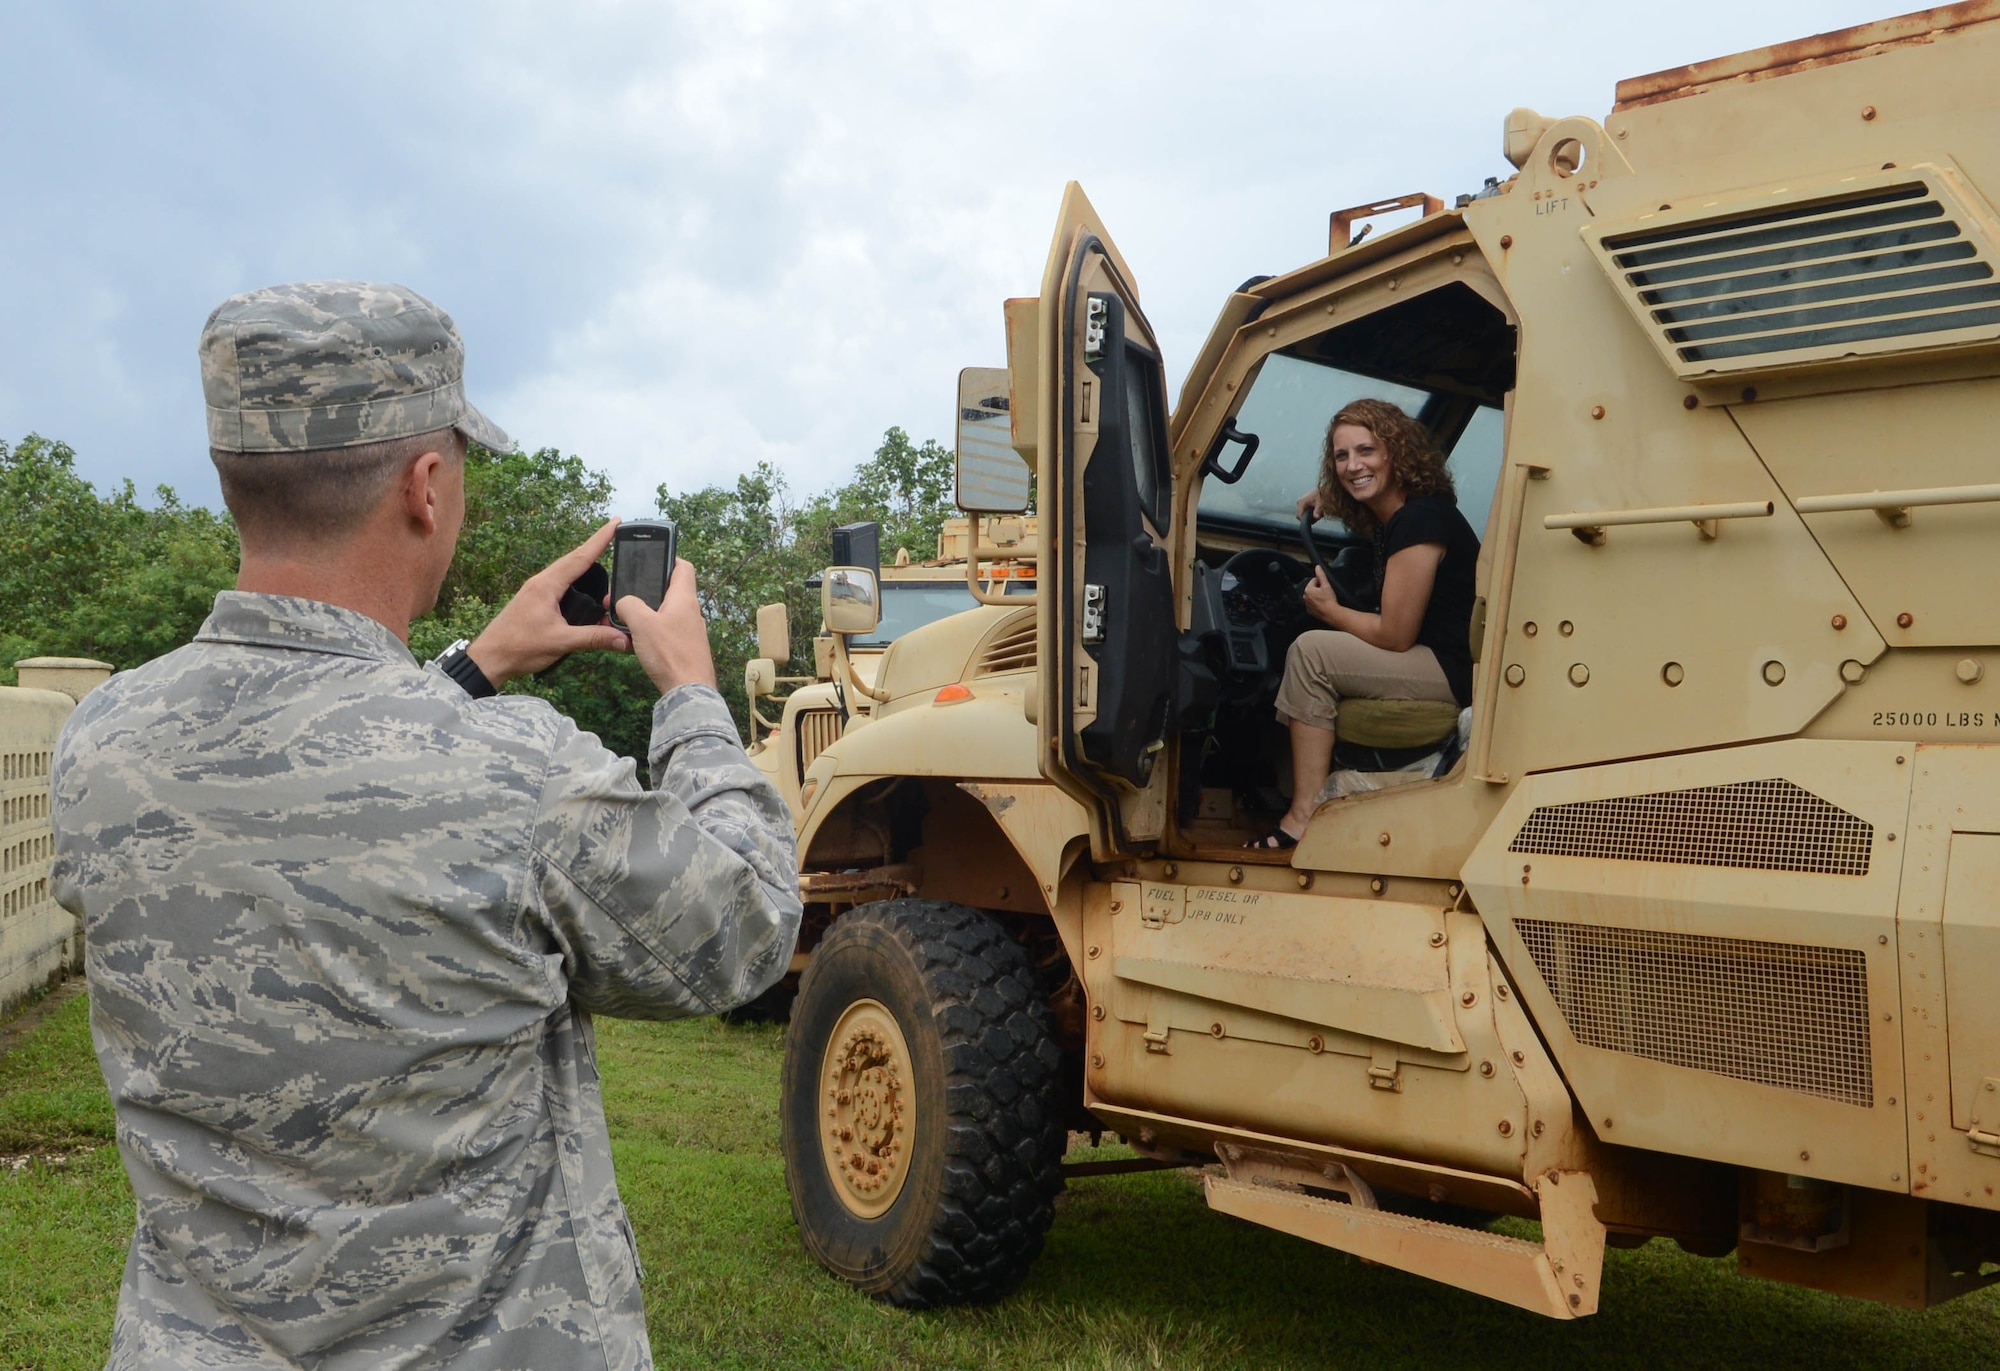 Col. Jason Armagost, 36th Wing vice commander, takes a photo of his wife inside a mine-resistant, ambush-protected vehicle during a tour for military spouses Oct. 22, 2013 on Northwest Field, Guam. The spouses learned about the history of Northwest Field, observed the training site for upcoming Silver Flag exercises, rode in a MRAP egress trainer and watched a military working dog demonstration. (U.S. Air Force photo by Airman 1st Class Emily A. Bradley/Released)